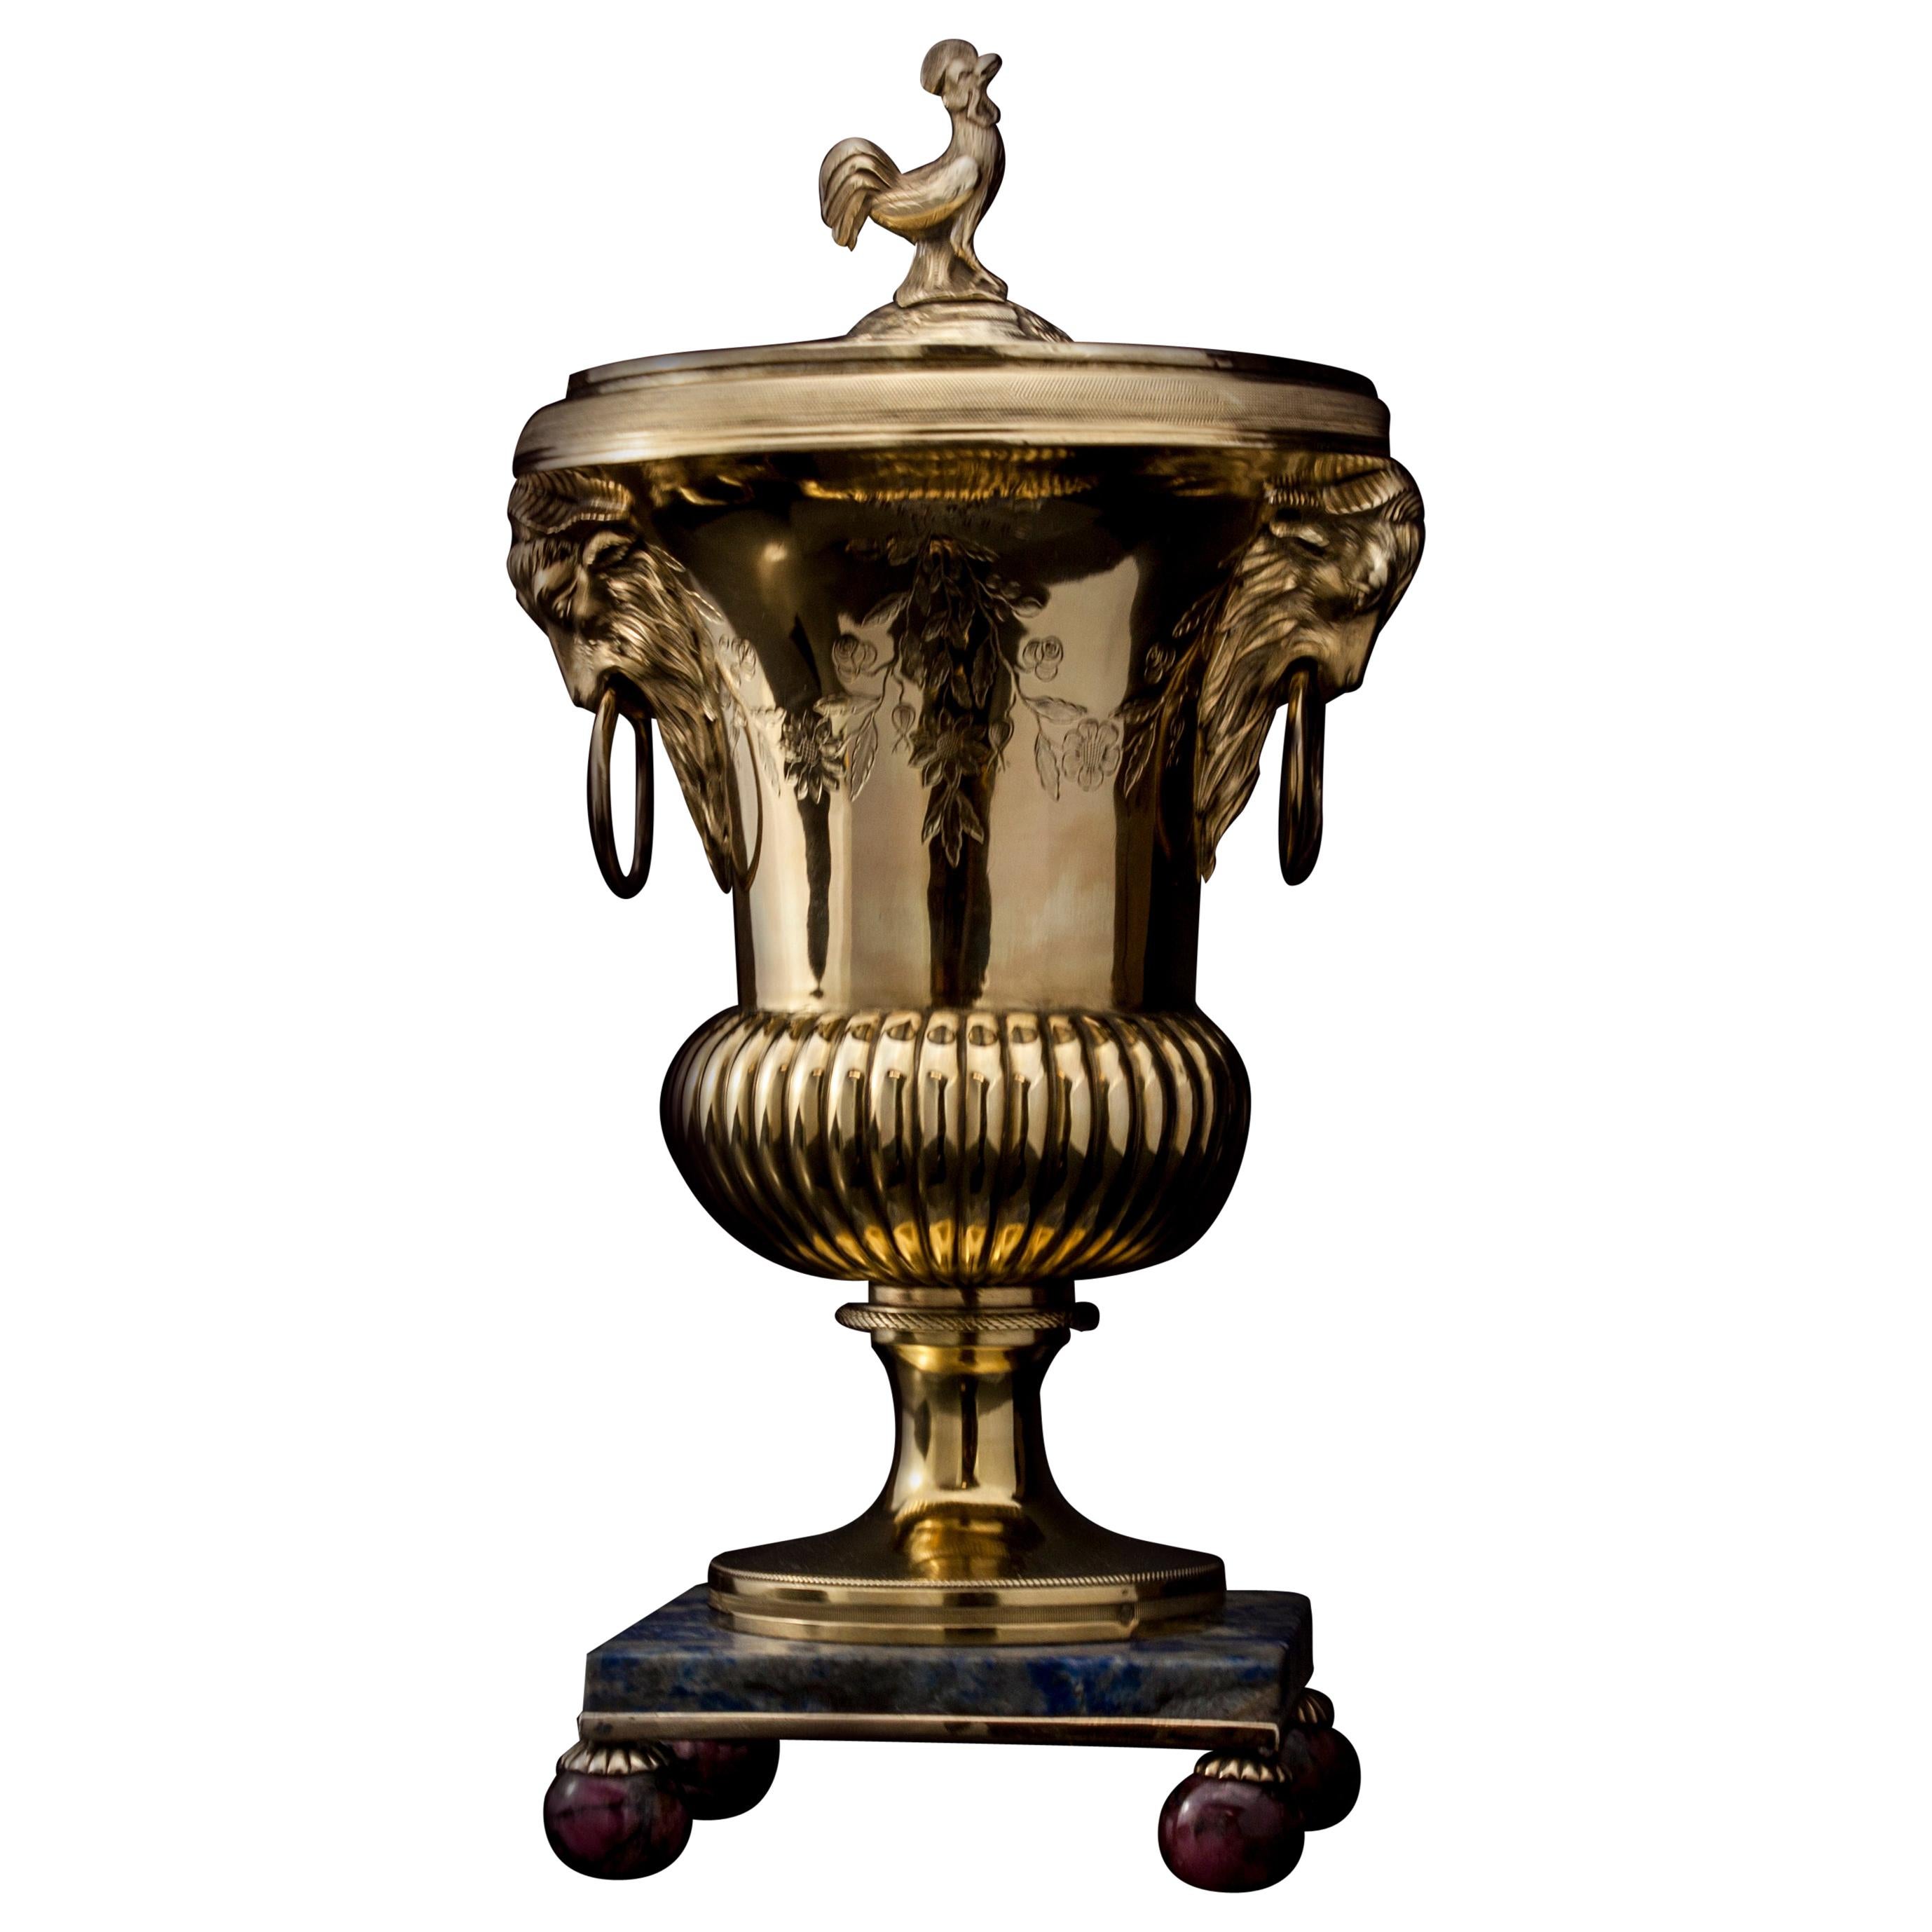 Antique French Silver Gilt Urn with Rooster Lid